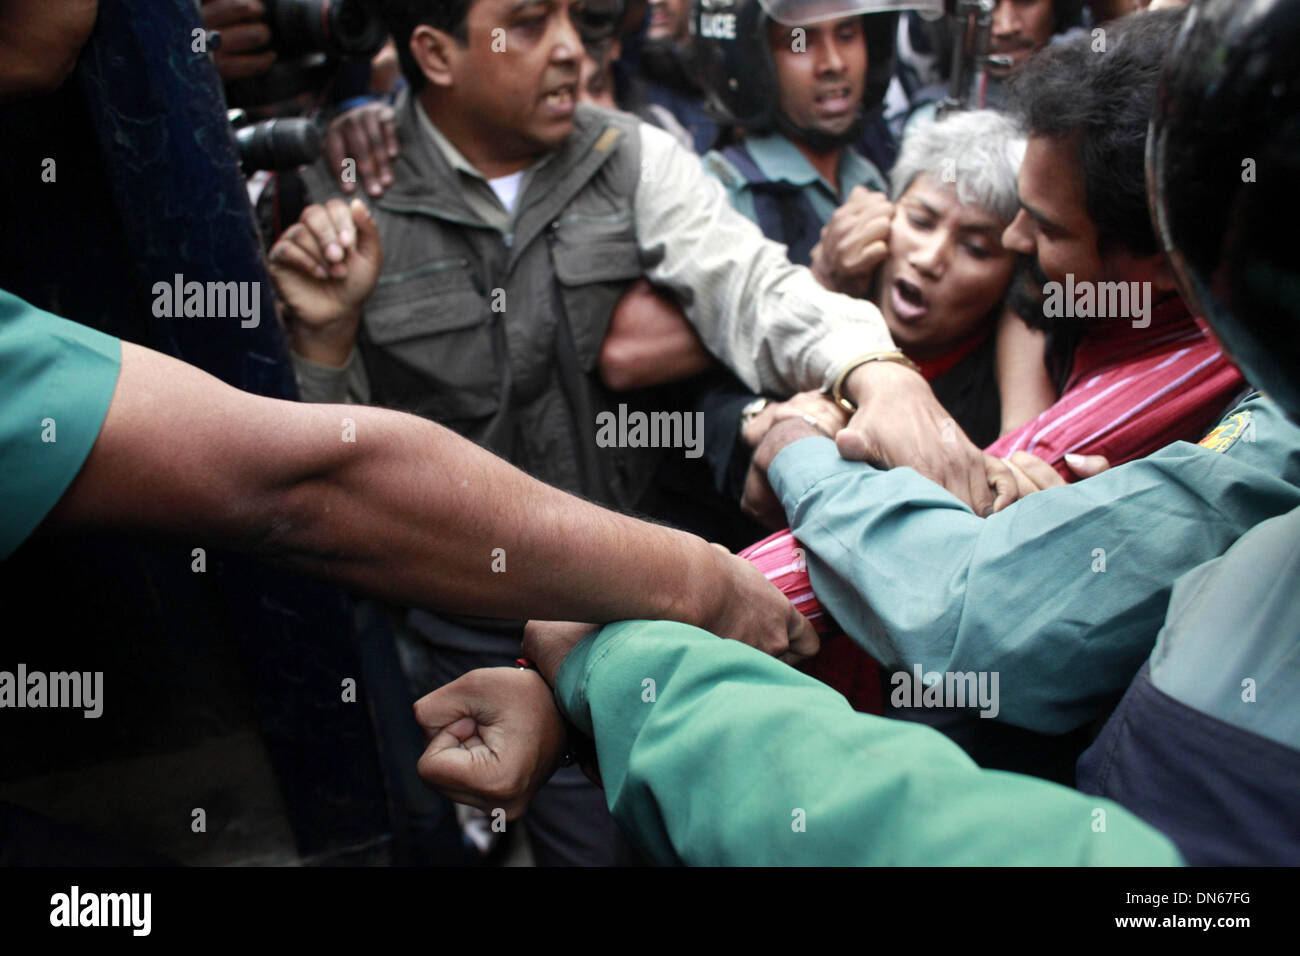 Dhaka, Bangladesh. 19th December 2013. Police trying to arrest IMRAN H Sarker, leader of Gnajagaran Monch. Police prevented the 'Ganajagaran Mancha' procession from entering the diplomatic enclave, their second march towards the Pakistan High Commission in Dhaka. Credit:  zakir hossain chowdhury zakir/Alamy Live News Stock Photo